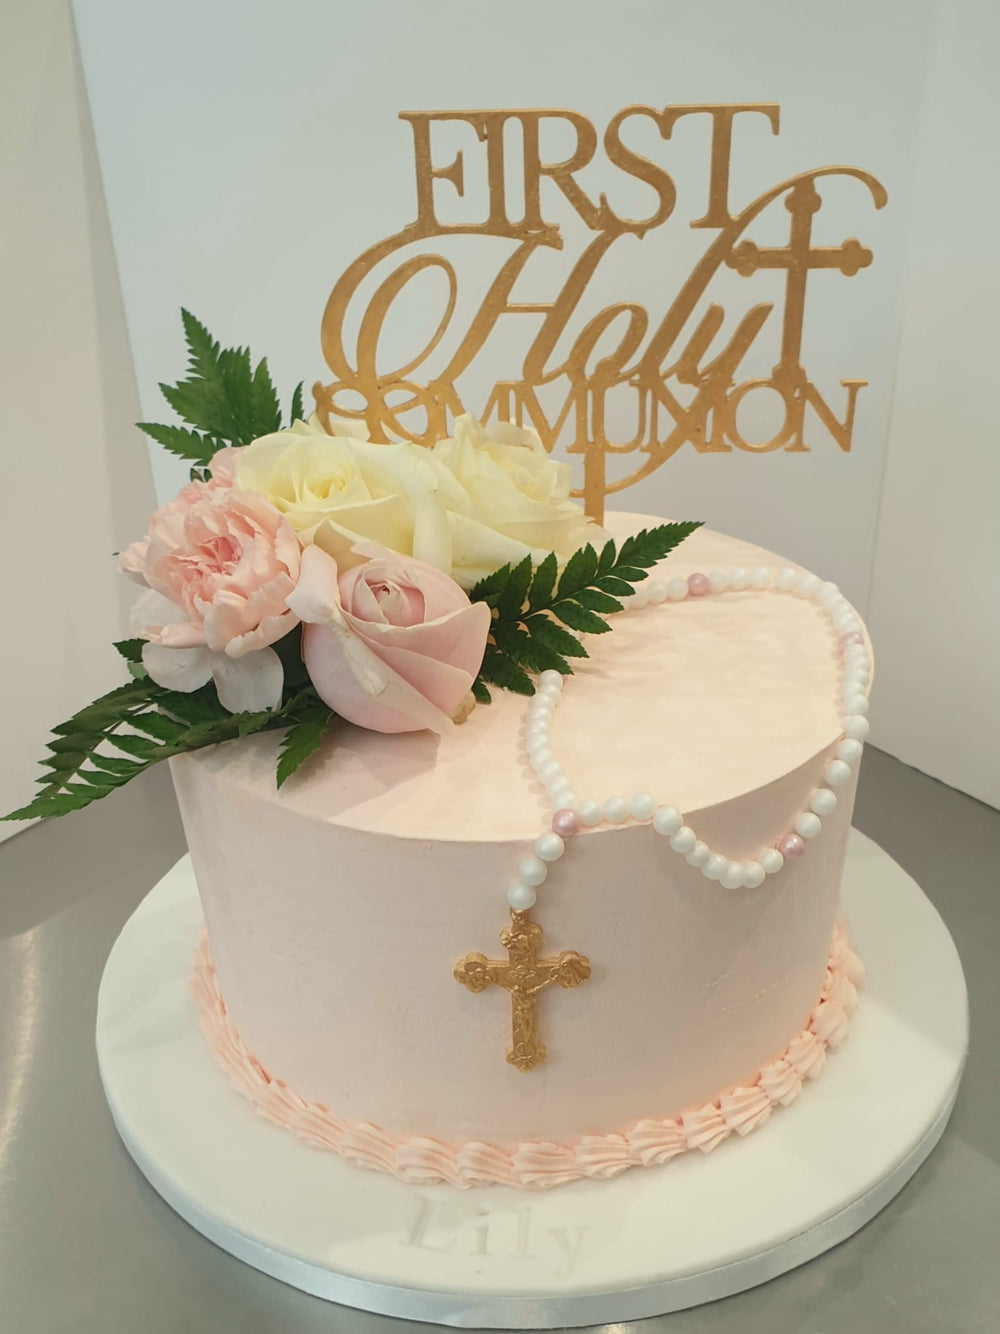 Great Cakes: Bespoke Cakes For Special Occasions, Weddings, Birthdays